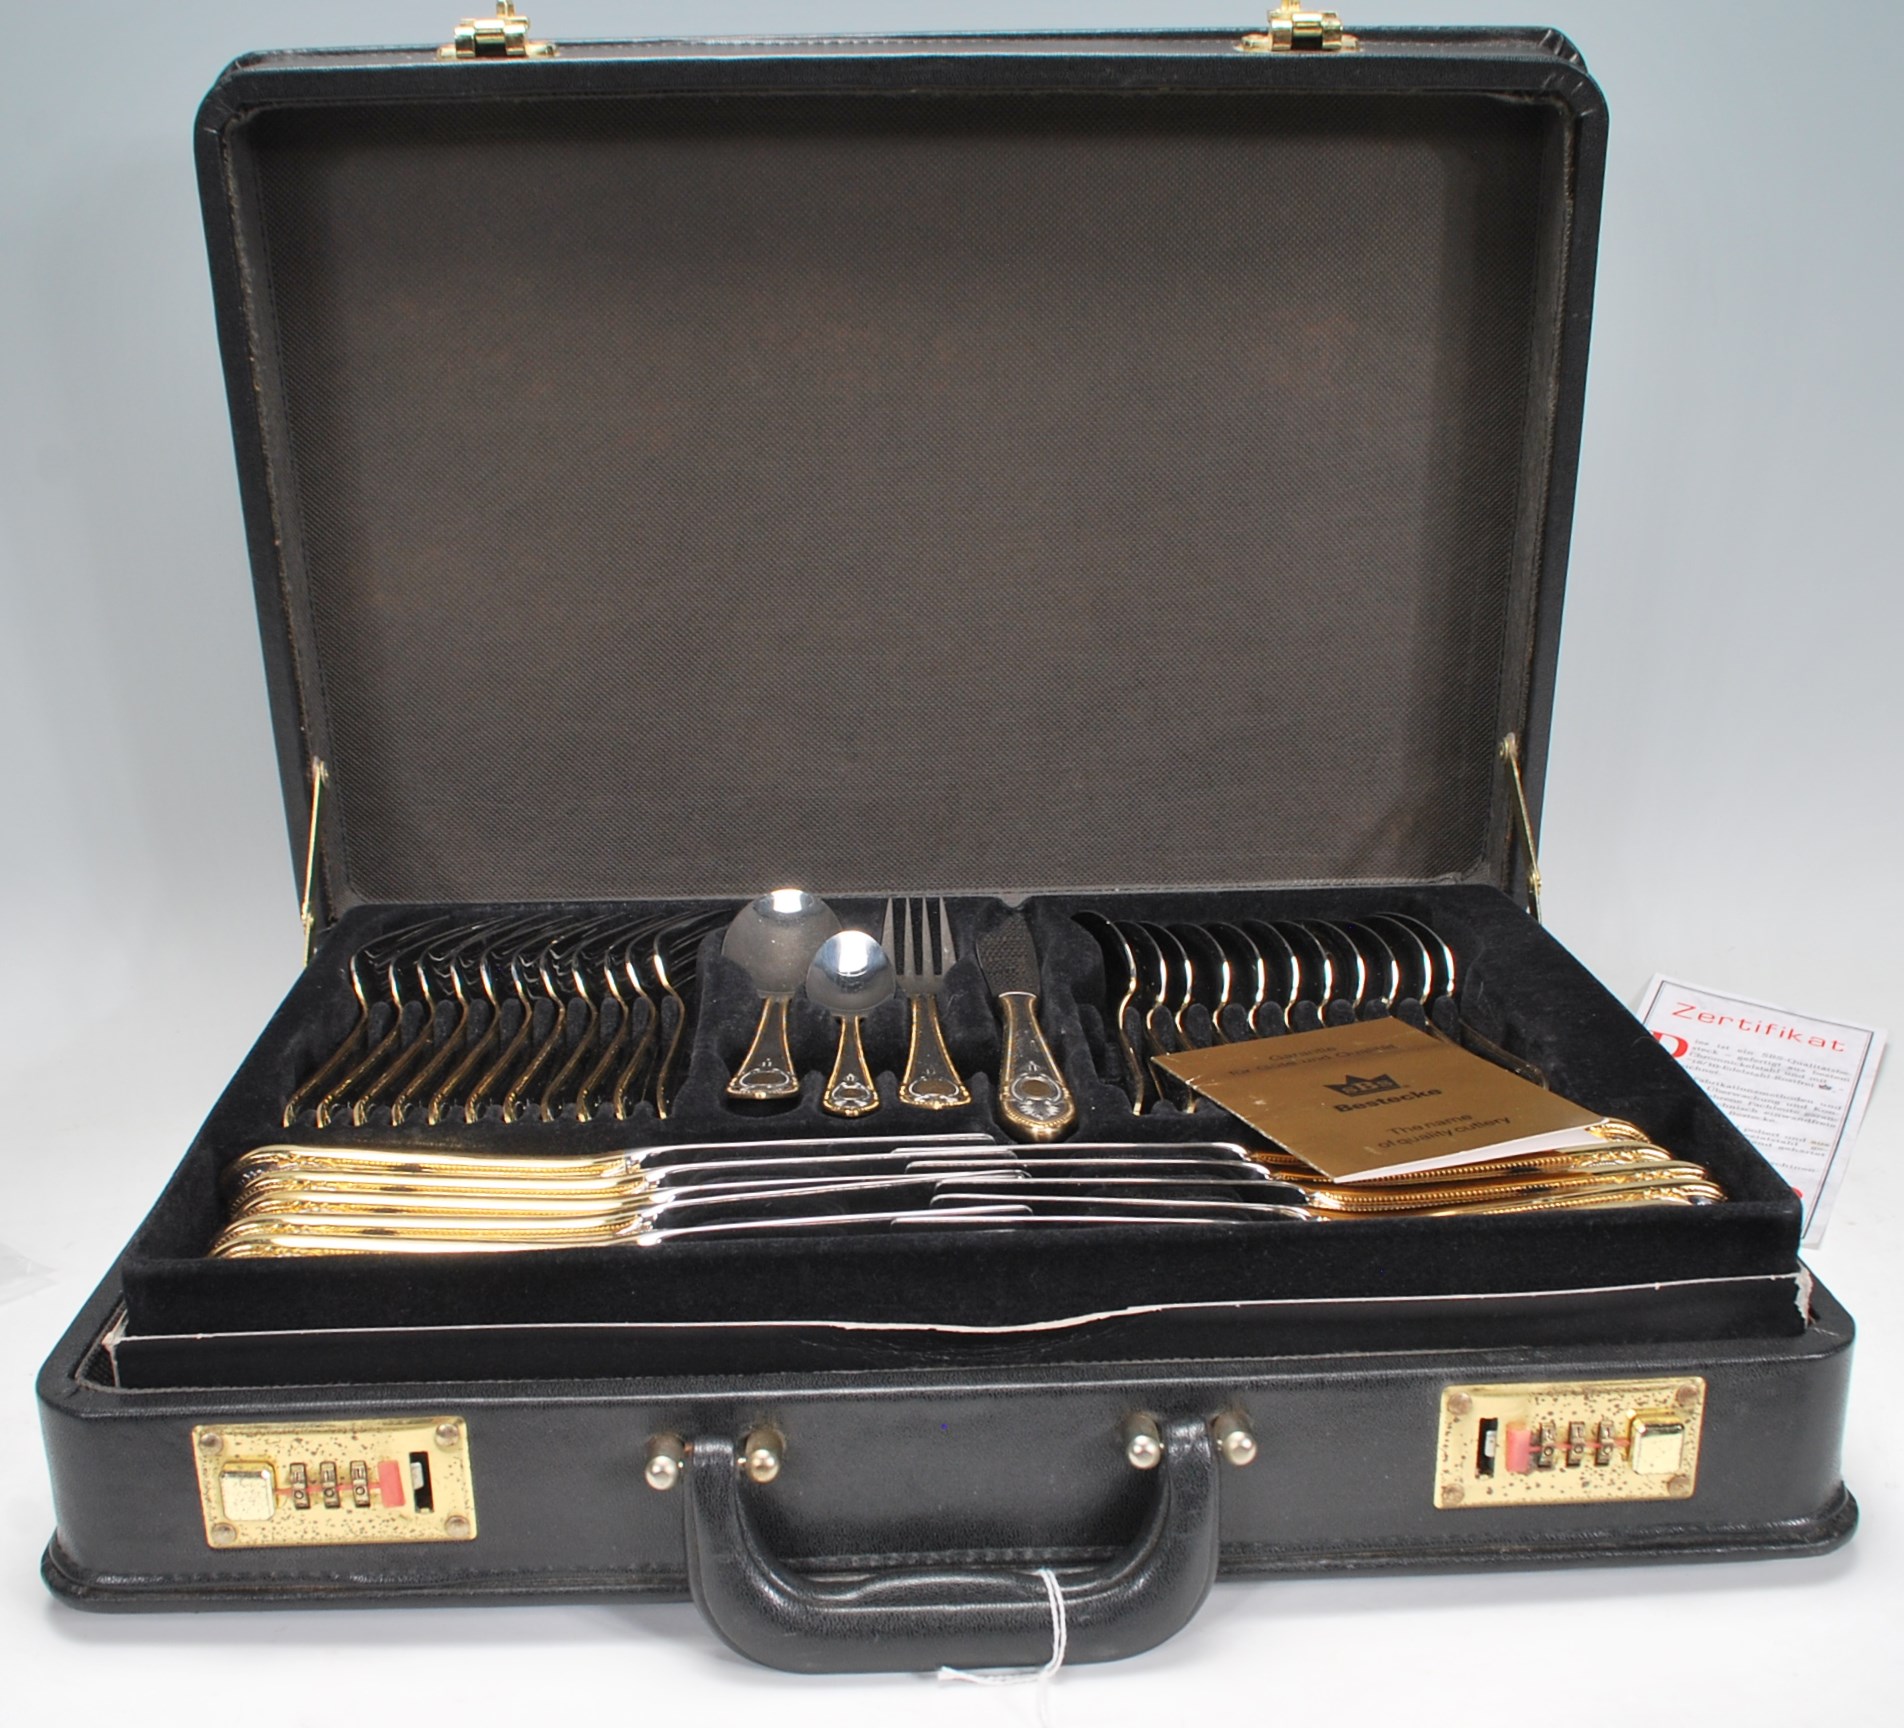 A cased 60 piece dinner table canteen of cutlery by SBS Besteckvertriebs-GmbH Solingen. Decorated in